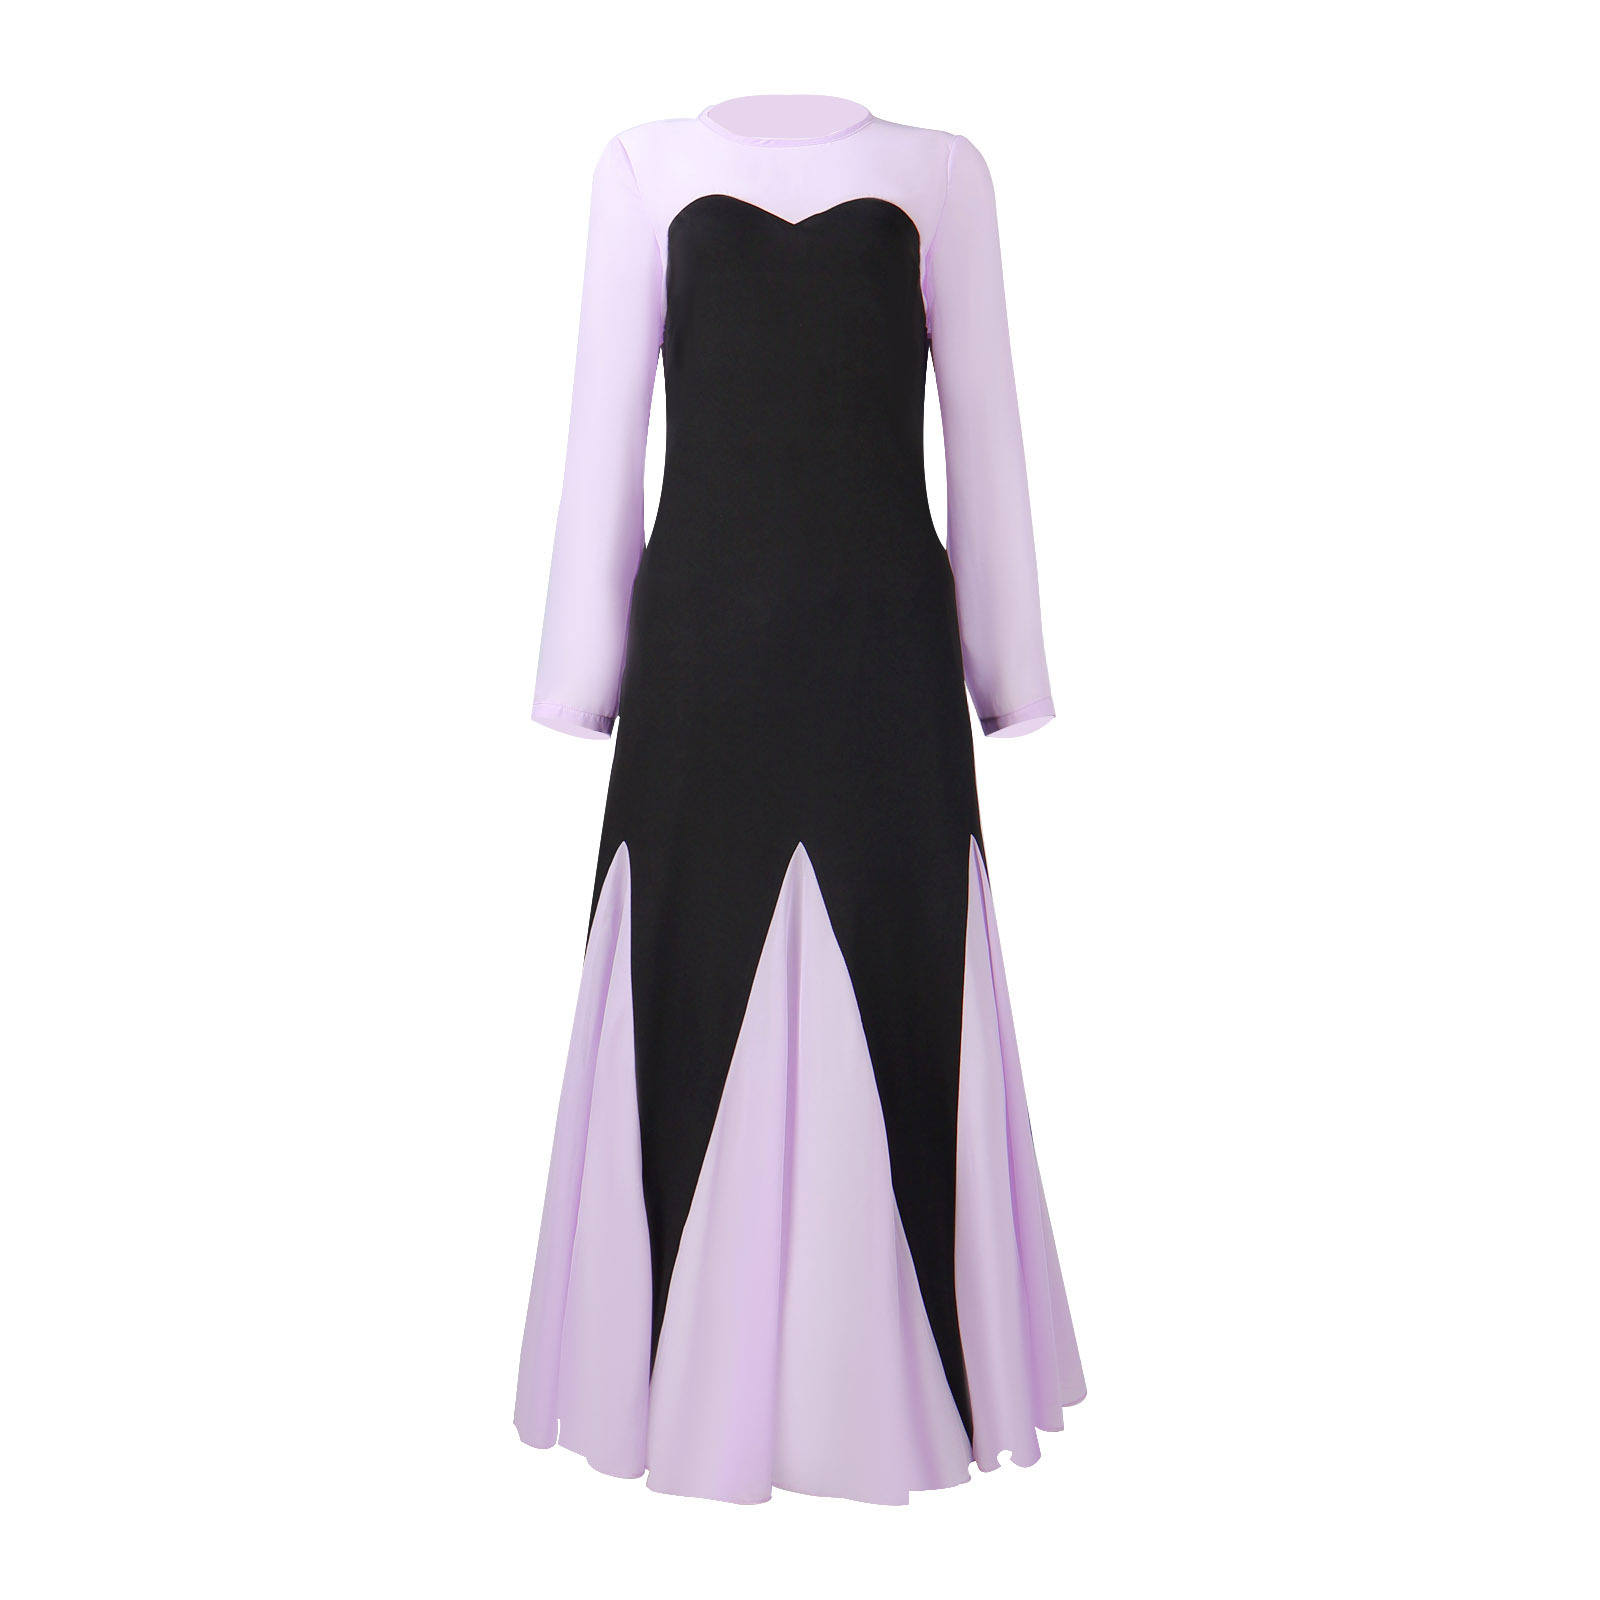 New Mermaid Ursula cosplay Halloween dress Cos film and television costume